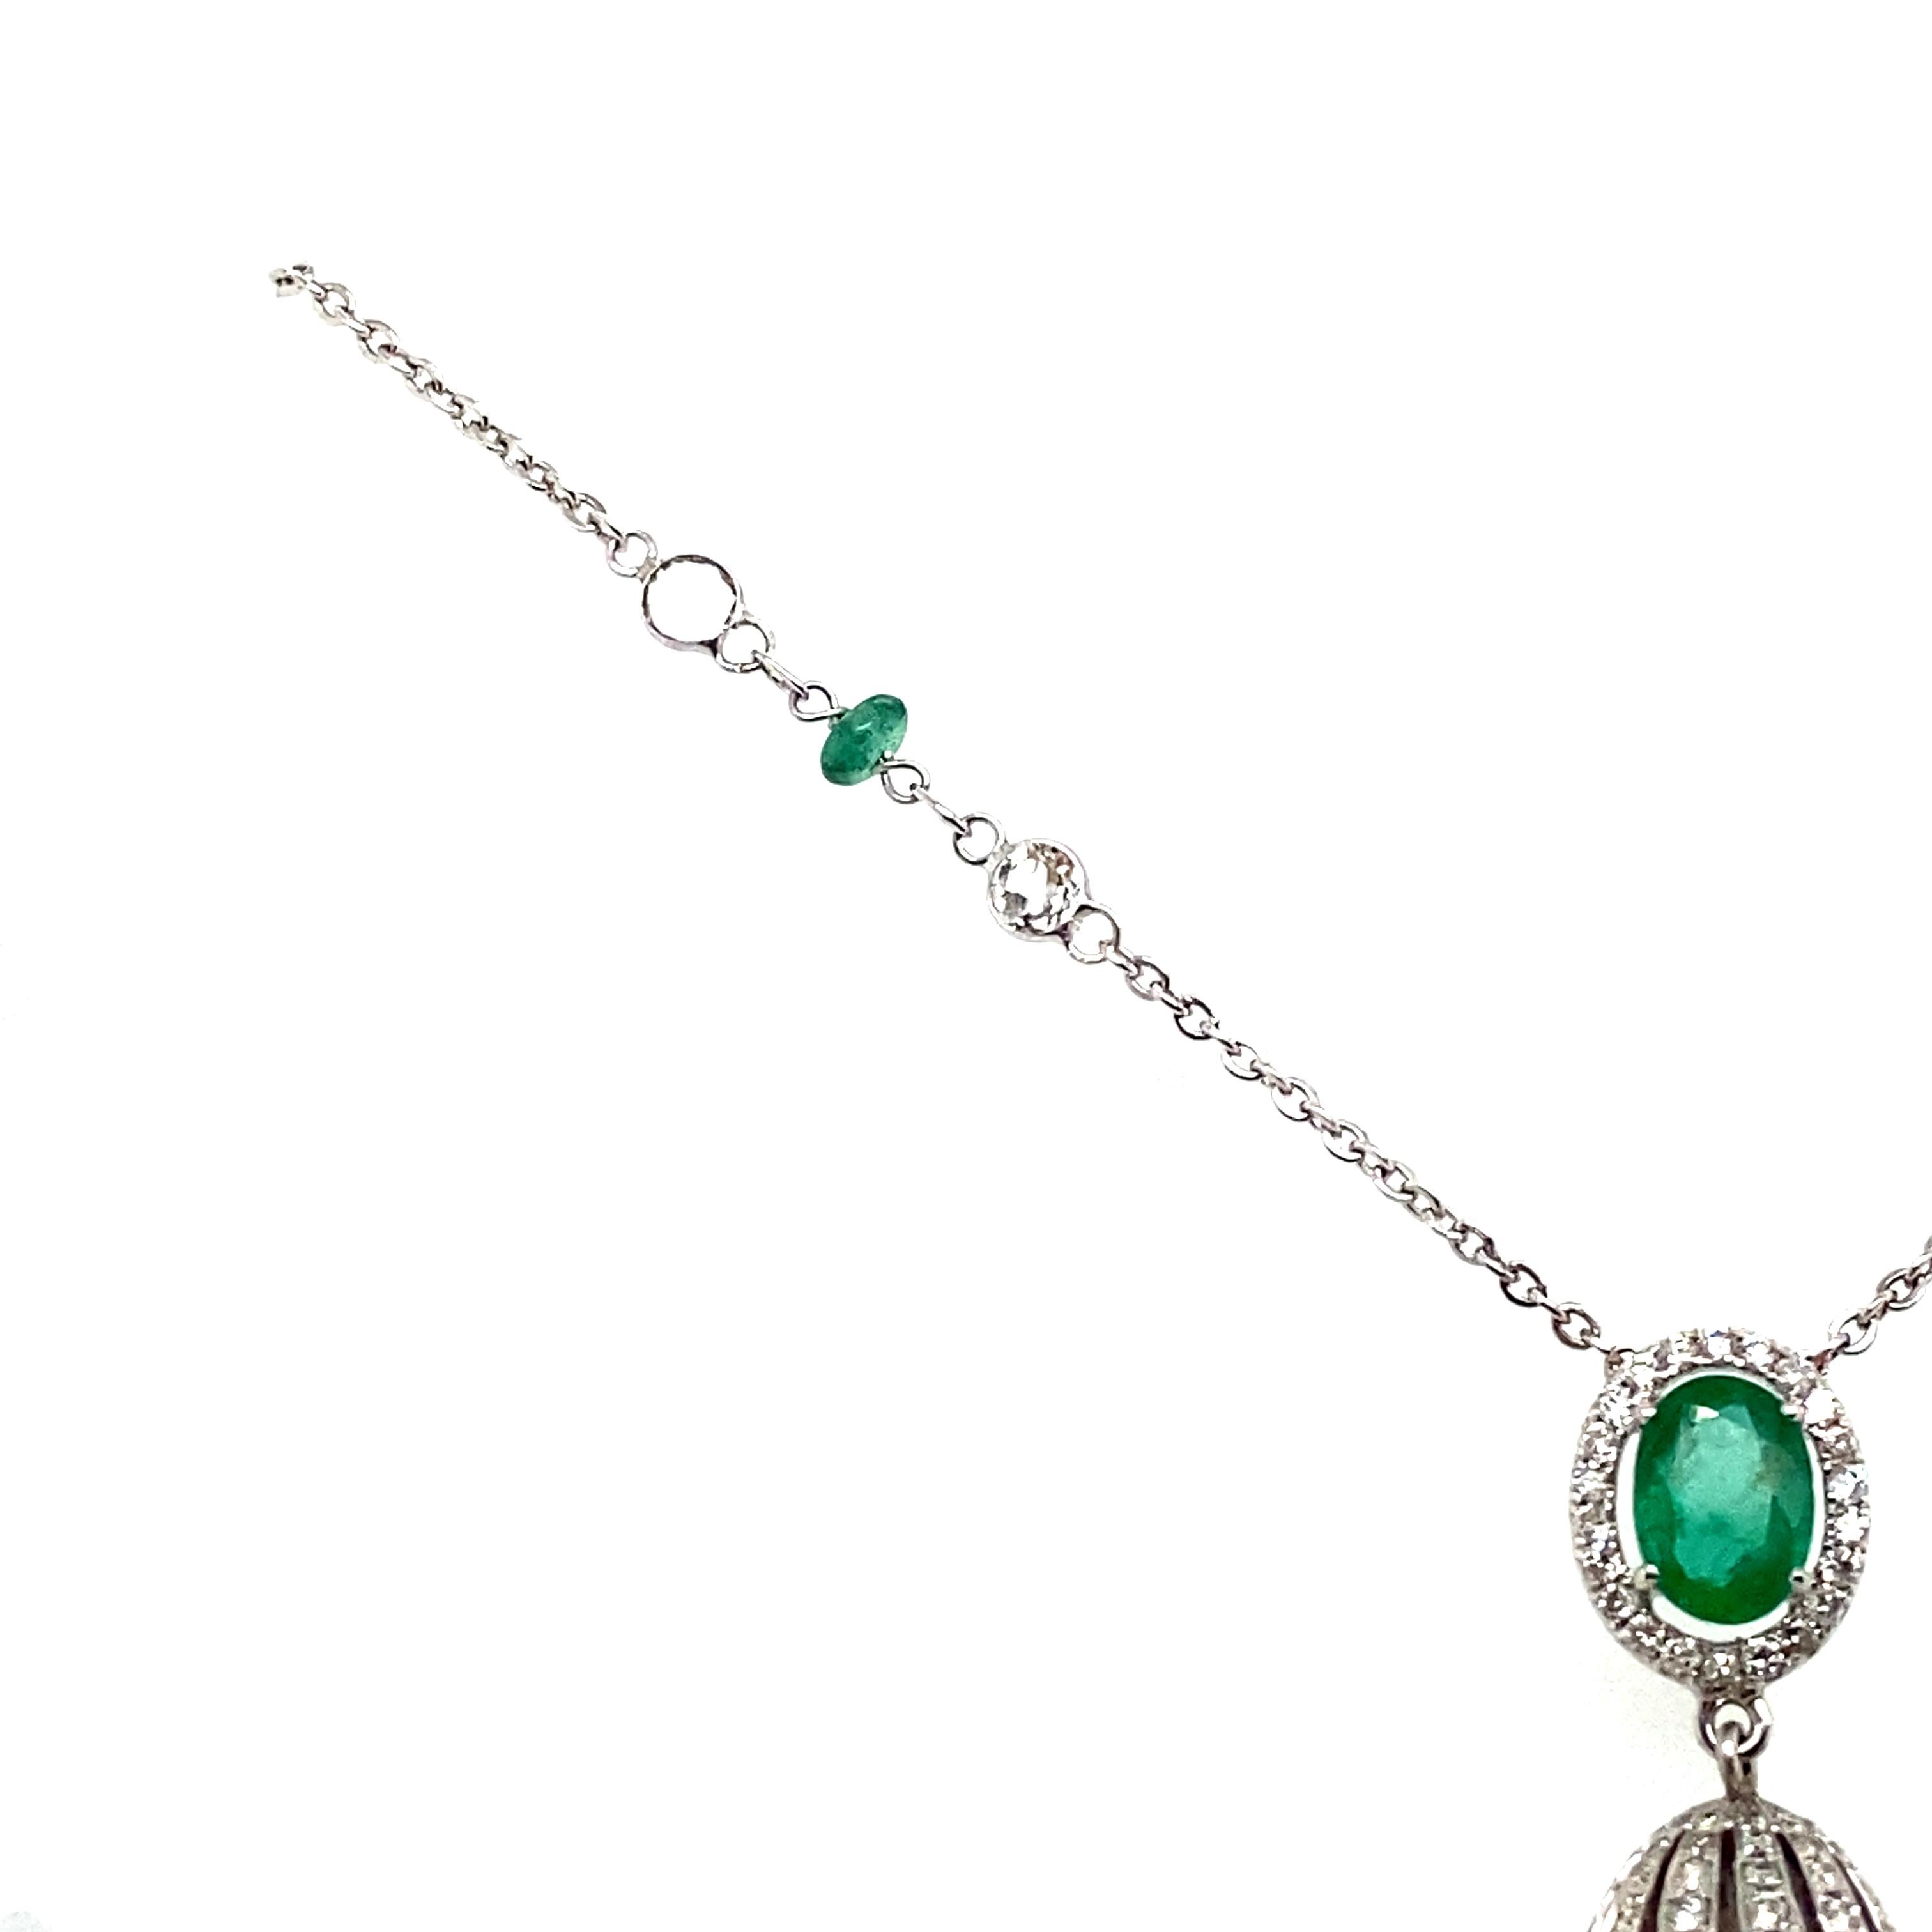 Oval Cut Oval-Cut Emerald, Emerald Beads, Pearls, and White Diamond Gold Tassel Necklace For Sale